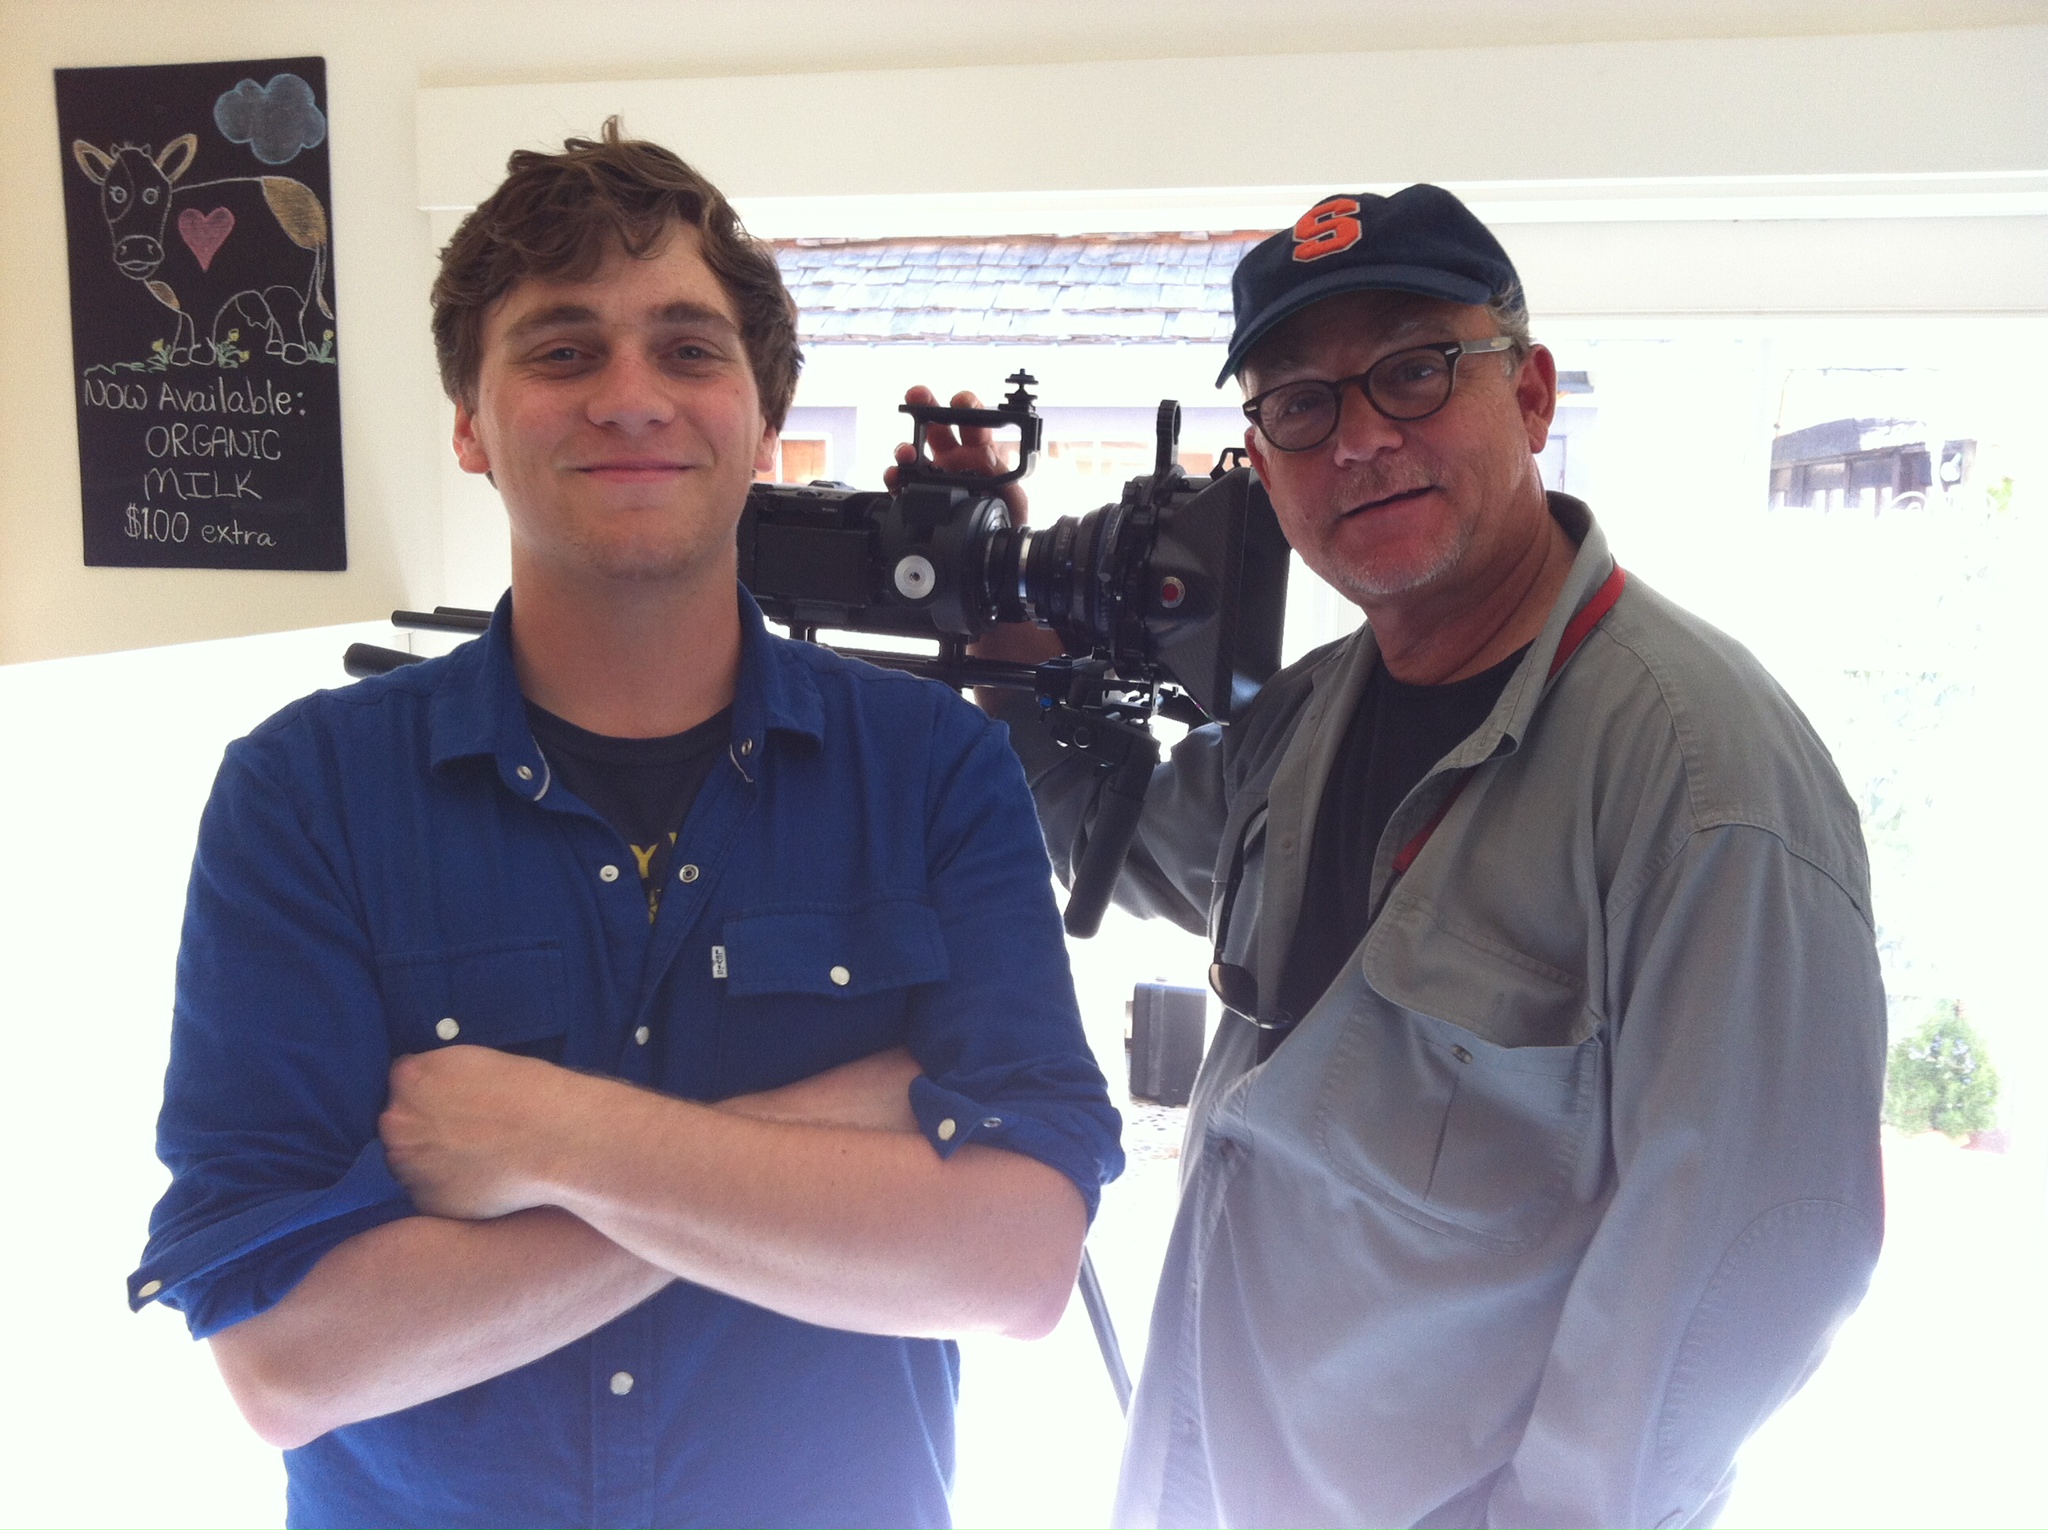 Jonathon McGee (Left) with Taggart Lee (Right) on the set of Cafe Window in Ventura, Ca. March 2013